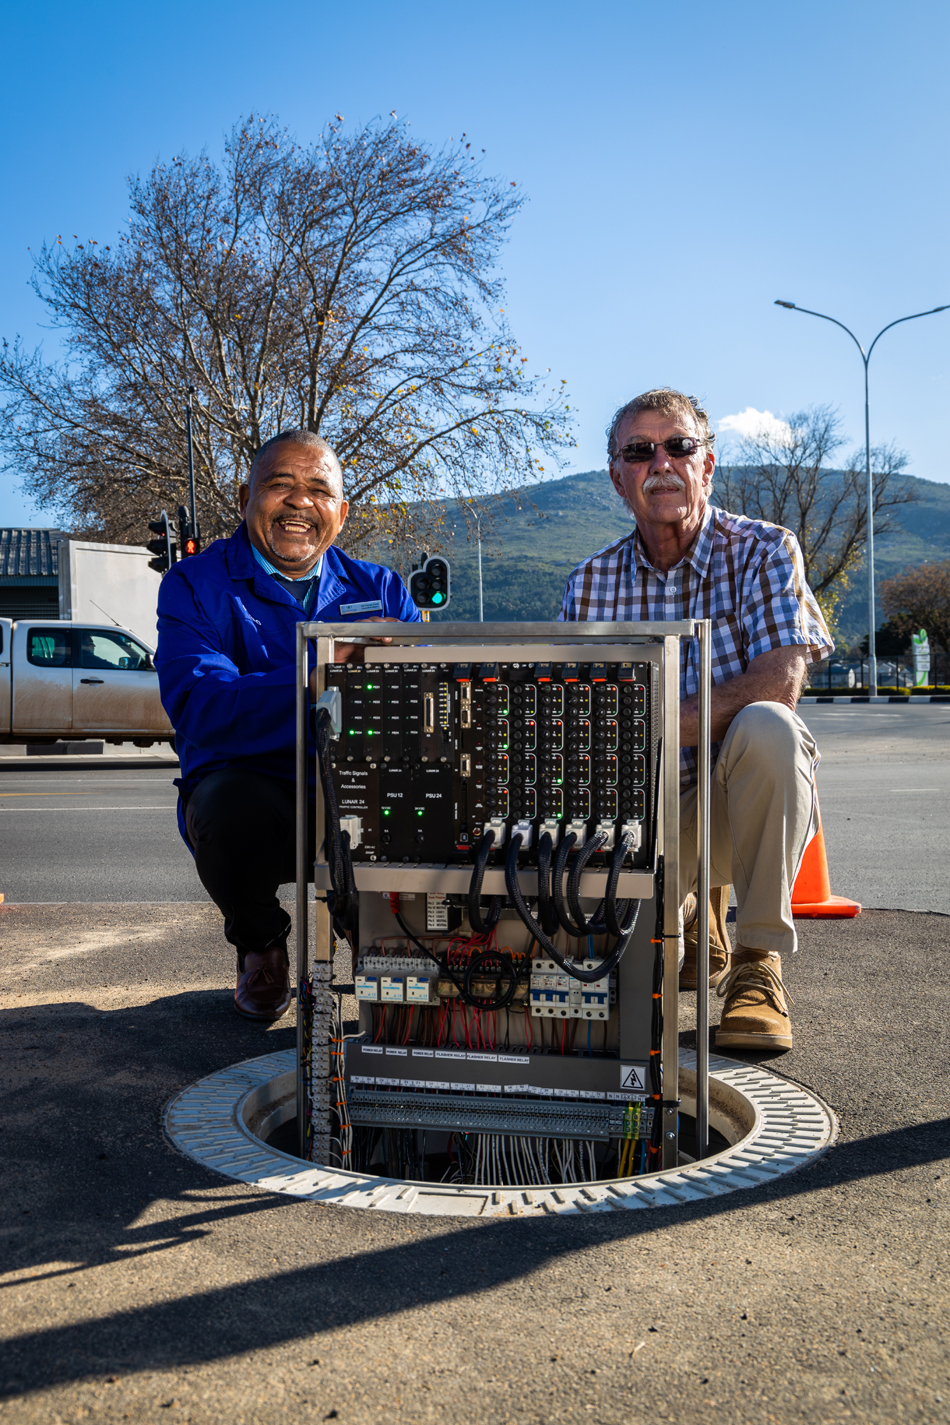 The Drakenstein Municipality is making good progress with installing Uninterrupted Power Supply equipment at major traffic intersections